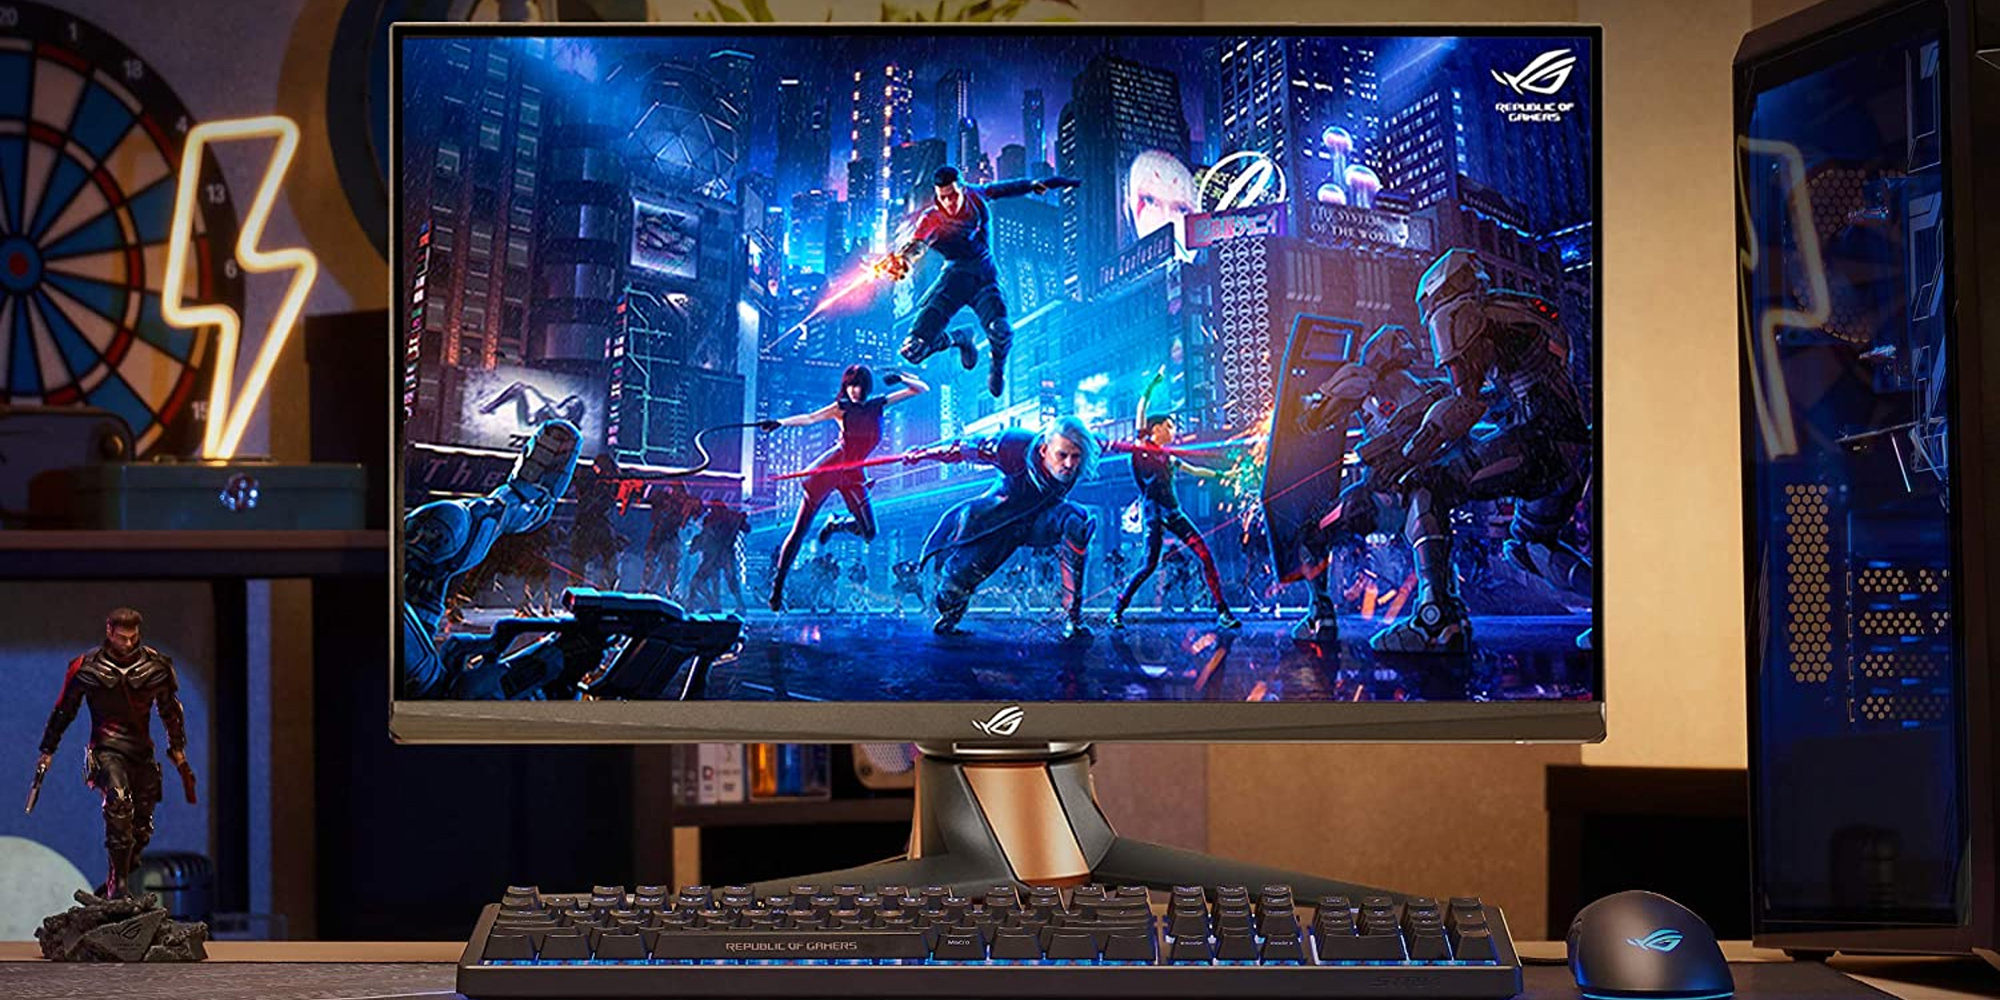 I Tried the Asus 360Hz Monitor, and It Made Me a Better Gamer